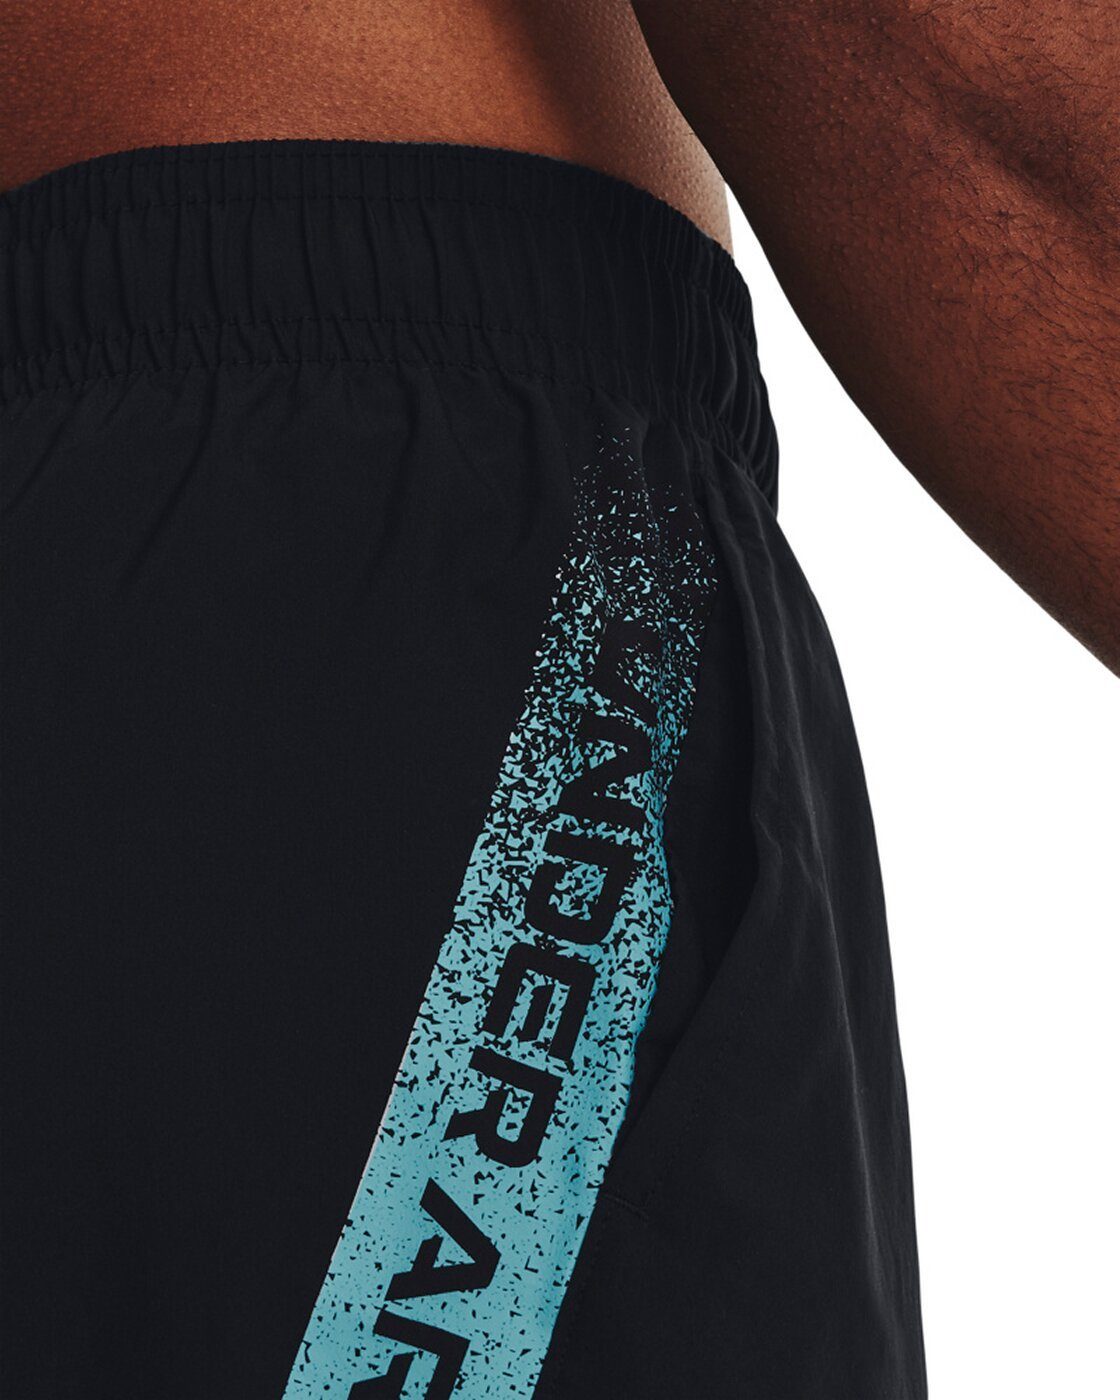 Under Armour® BLACK 005 SHORTS GRAPHIC UA WOVEN Funktionsshorts